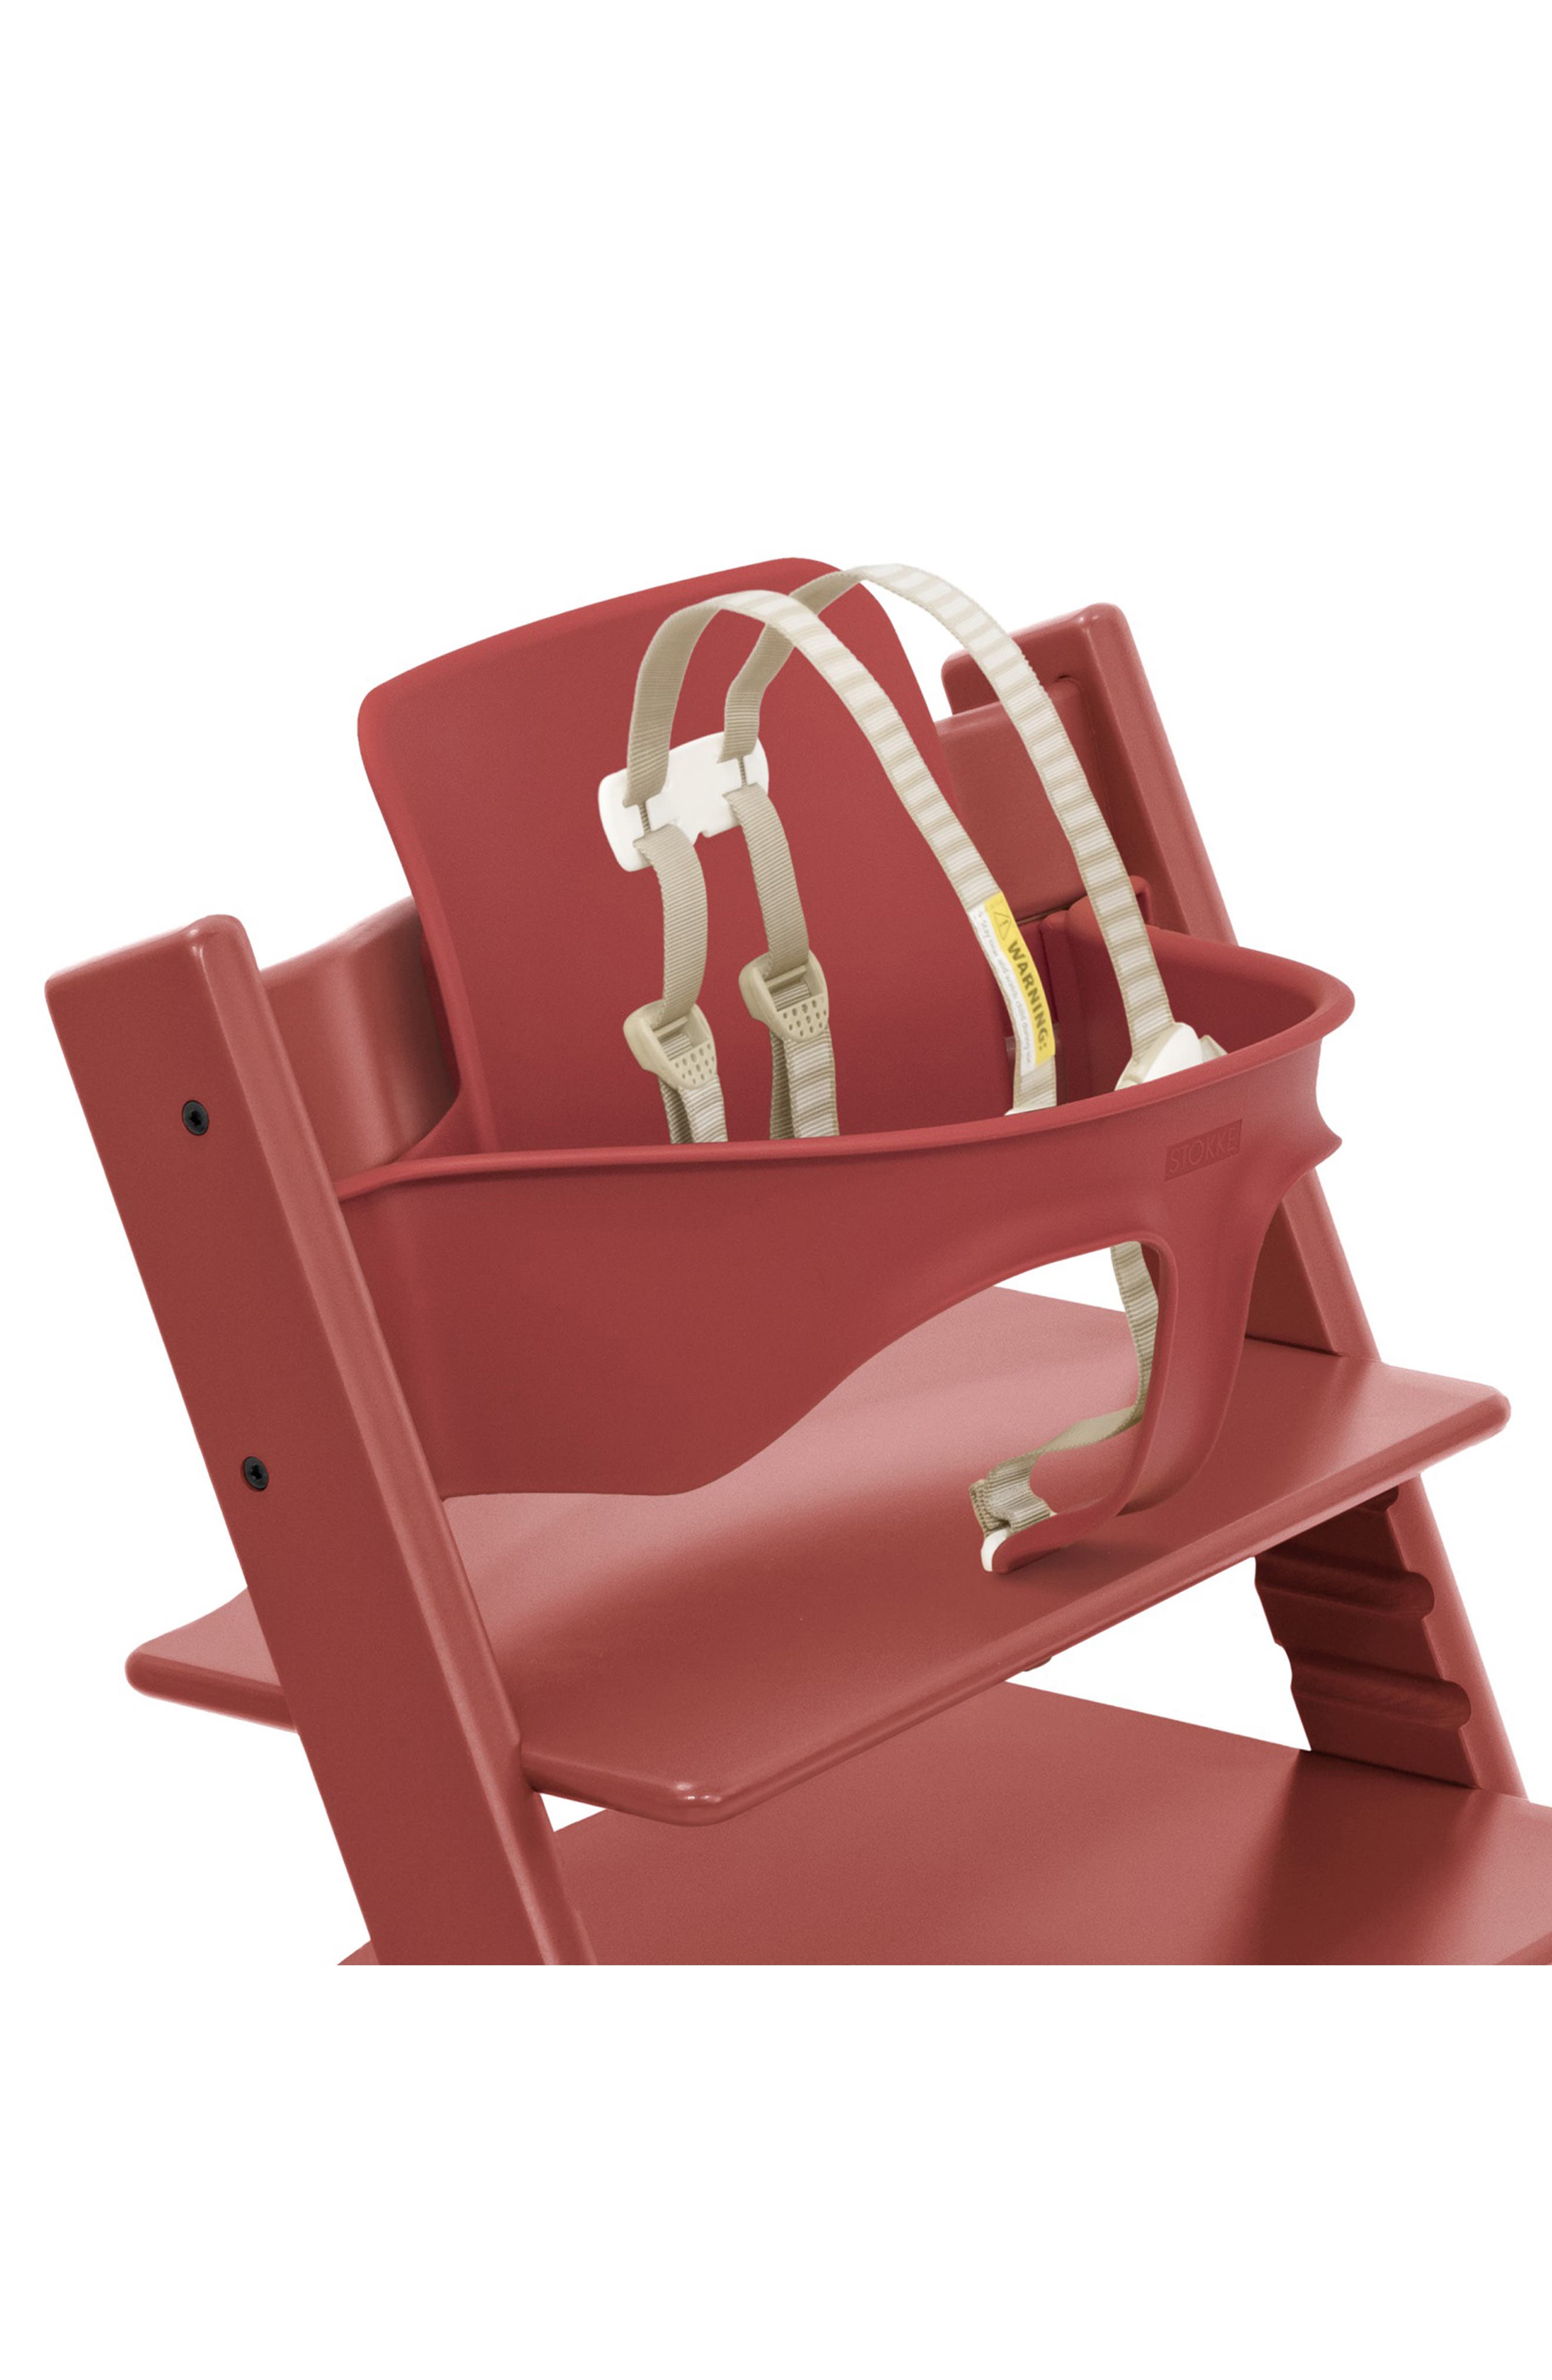 red high chair baby